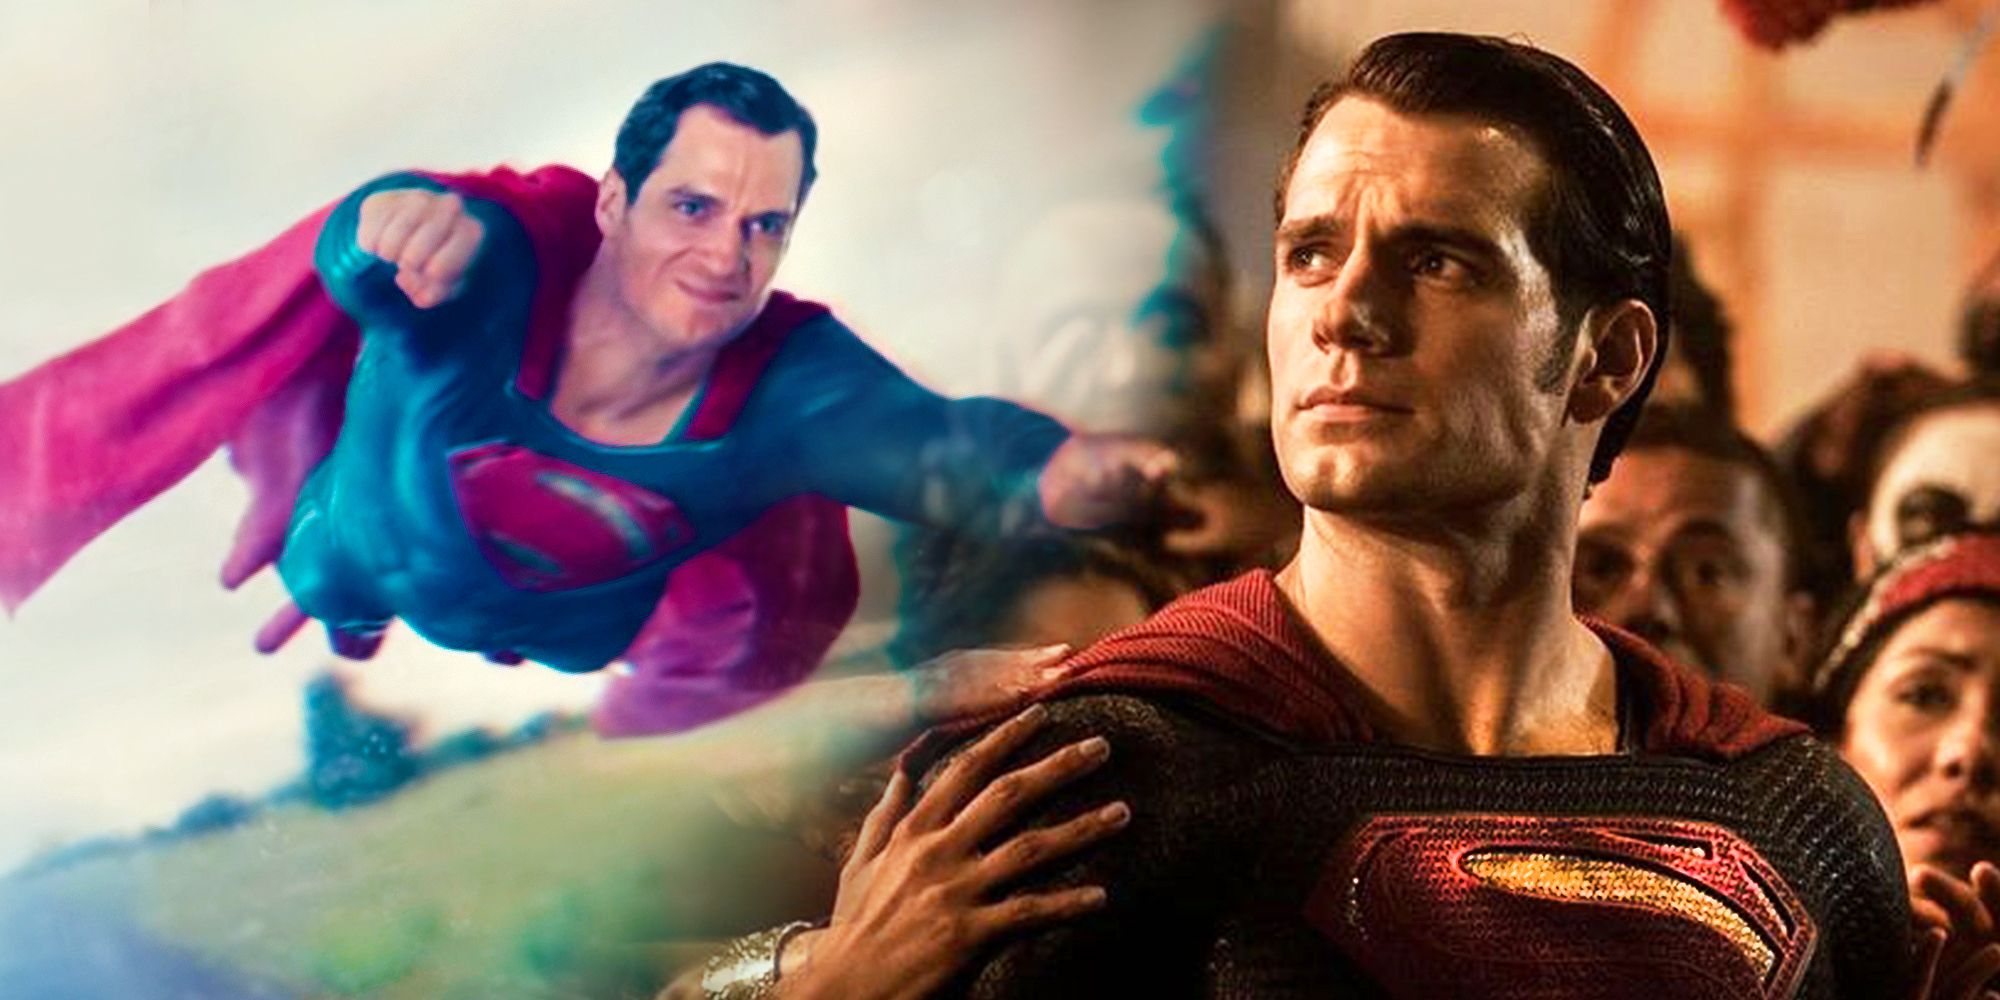 Henry Cavill as Superman in Batman v Superman Dawn of Justice and Justice League